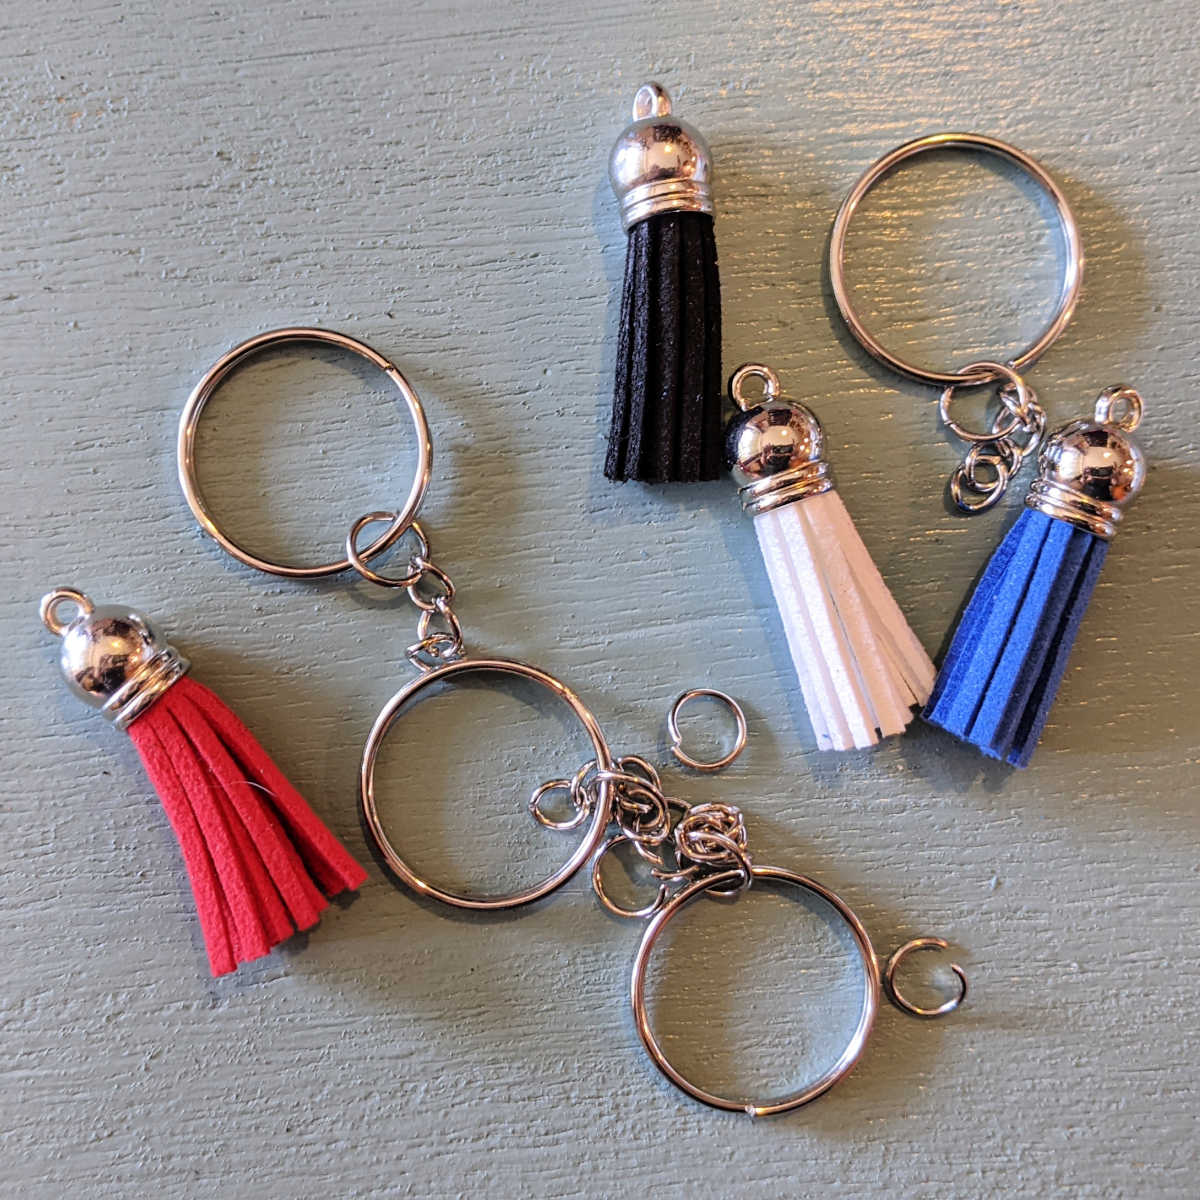 keychains and tassels